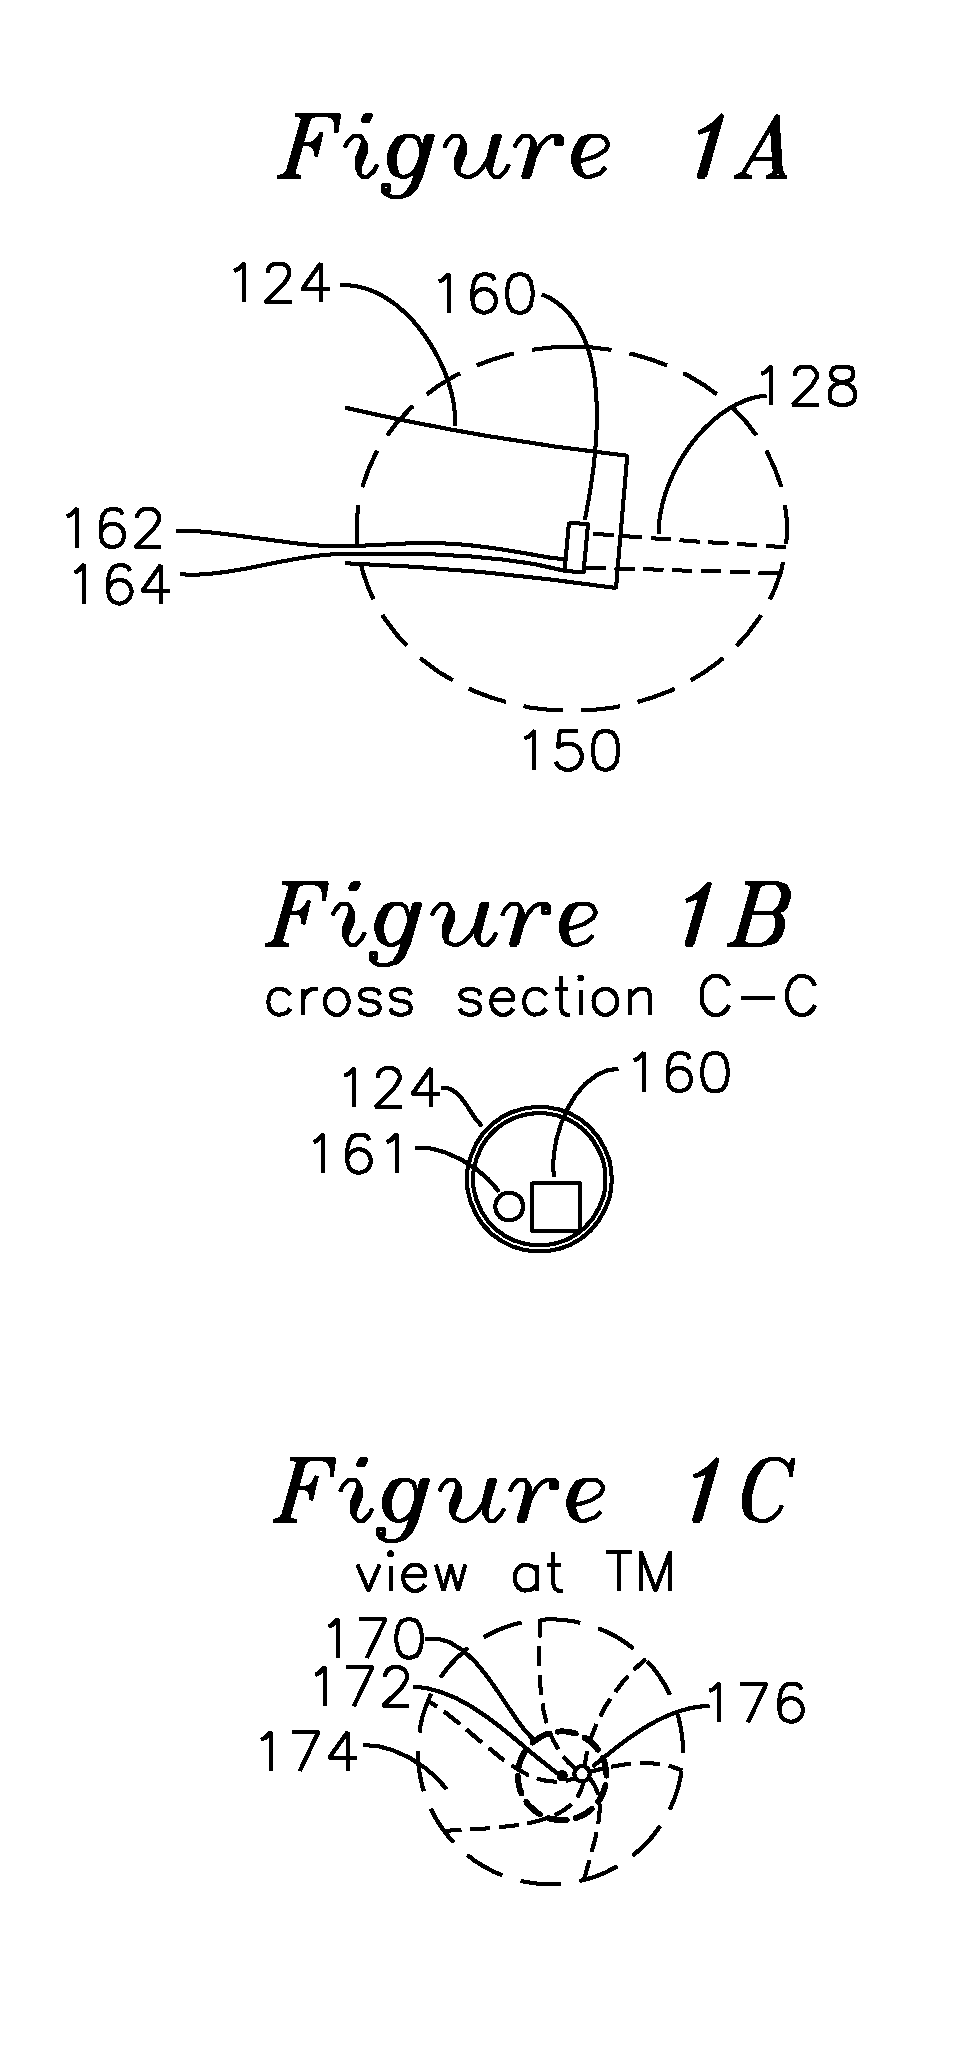 Apparatus and Method for Characterization of Acute Otitis Media